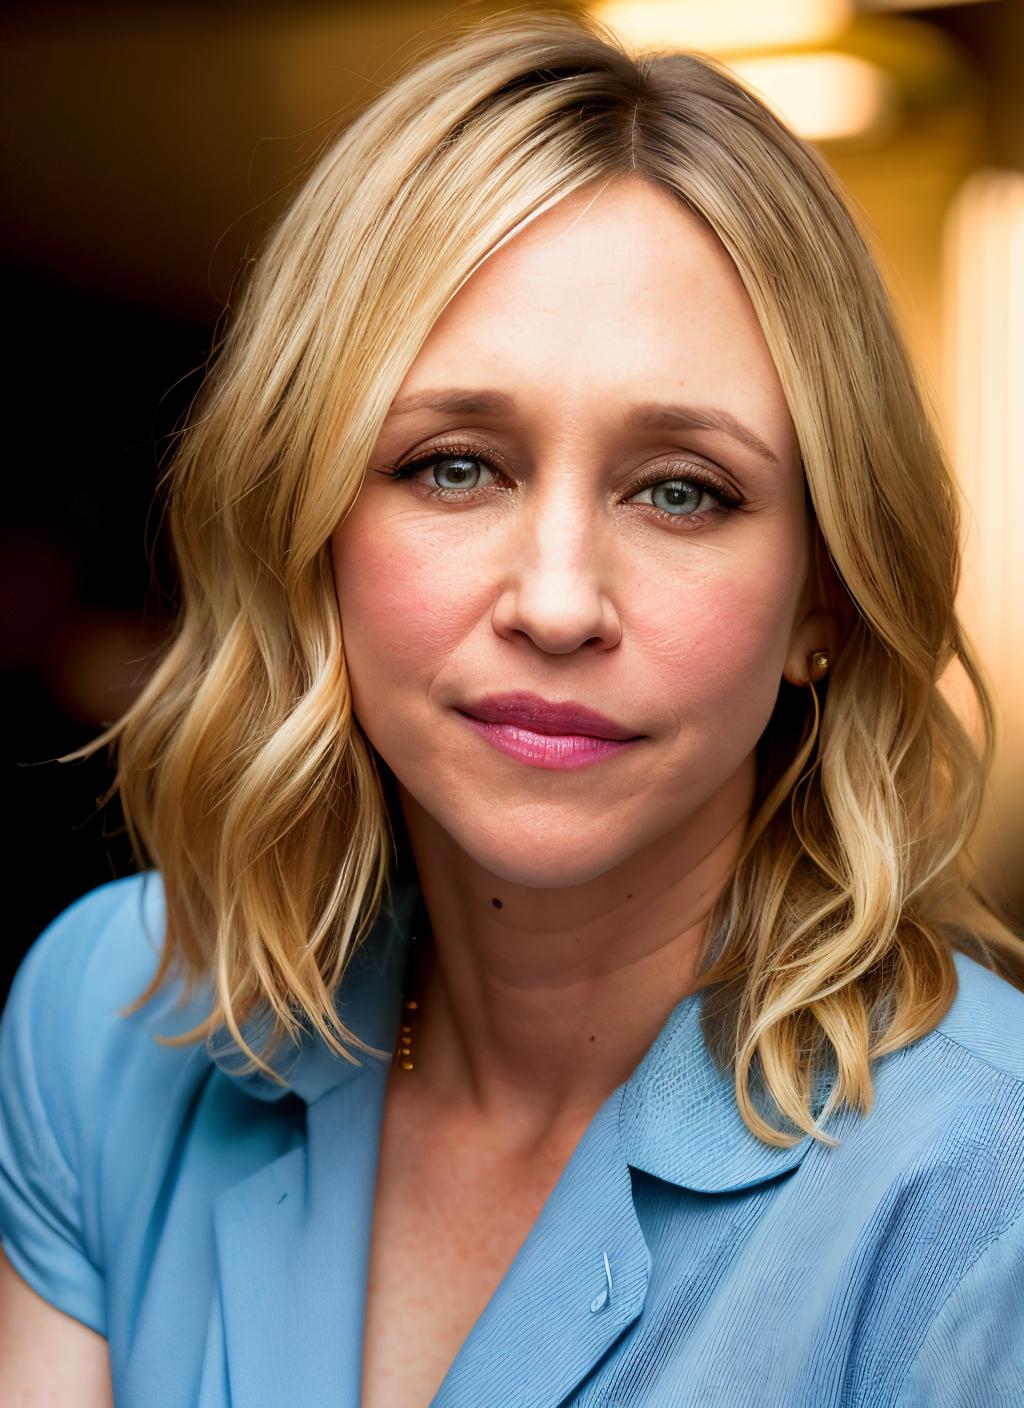 Vera Farmiga (from The Conjuring movie and Bates Motel TV show) image by astragartist